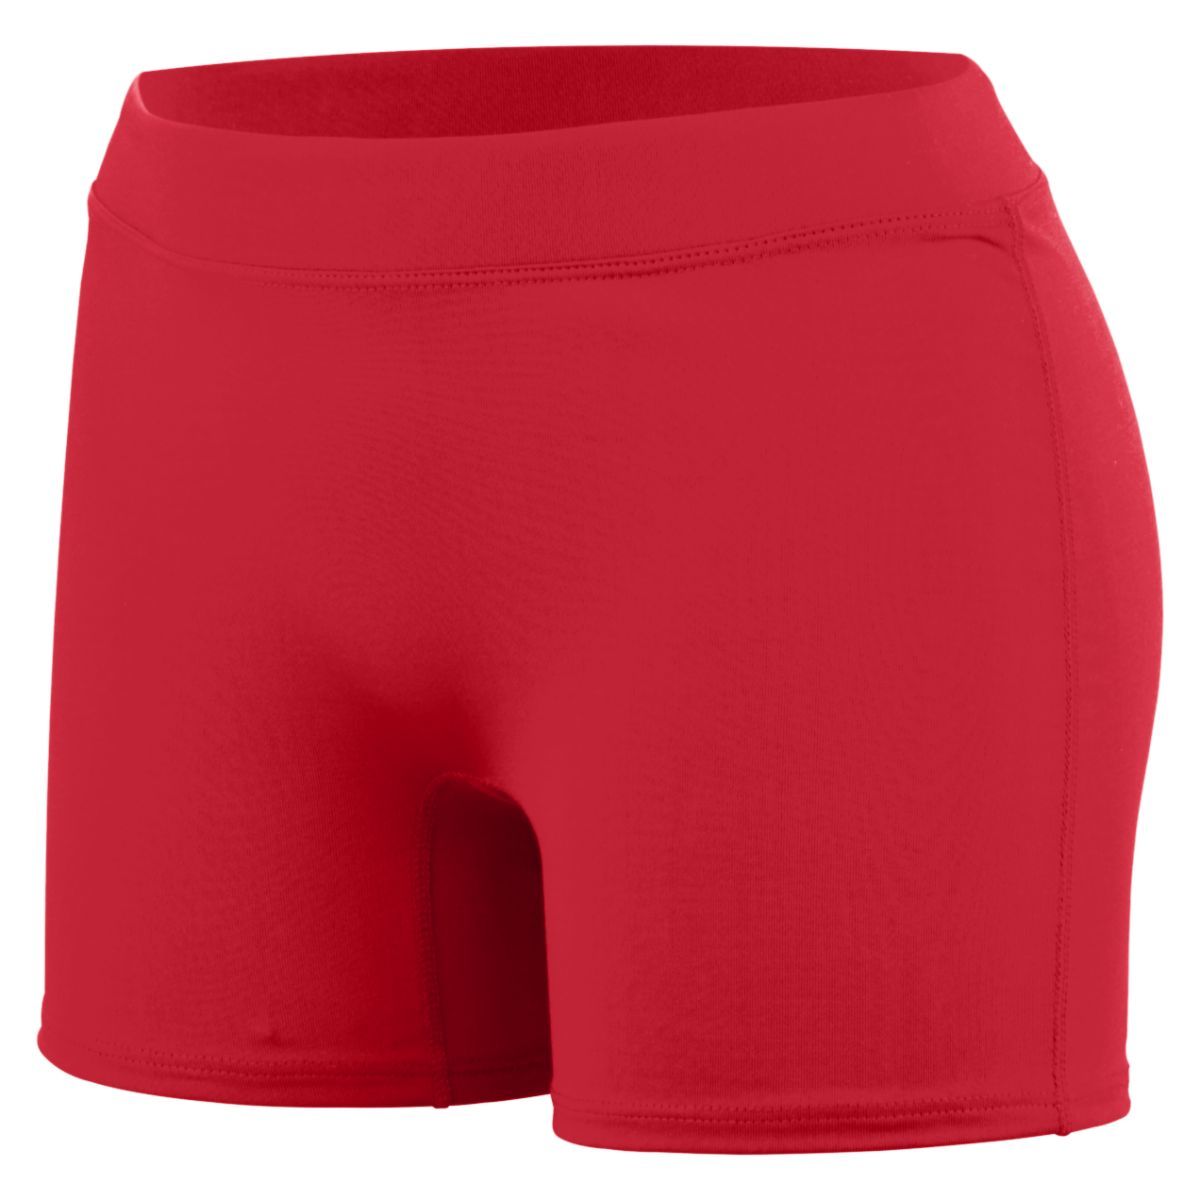 Augusta Sportswear Women's Enthuse Volleyball Short, Red, M - image 5 of 5